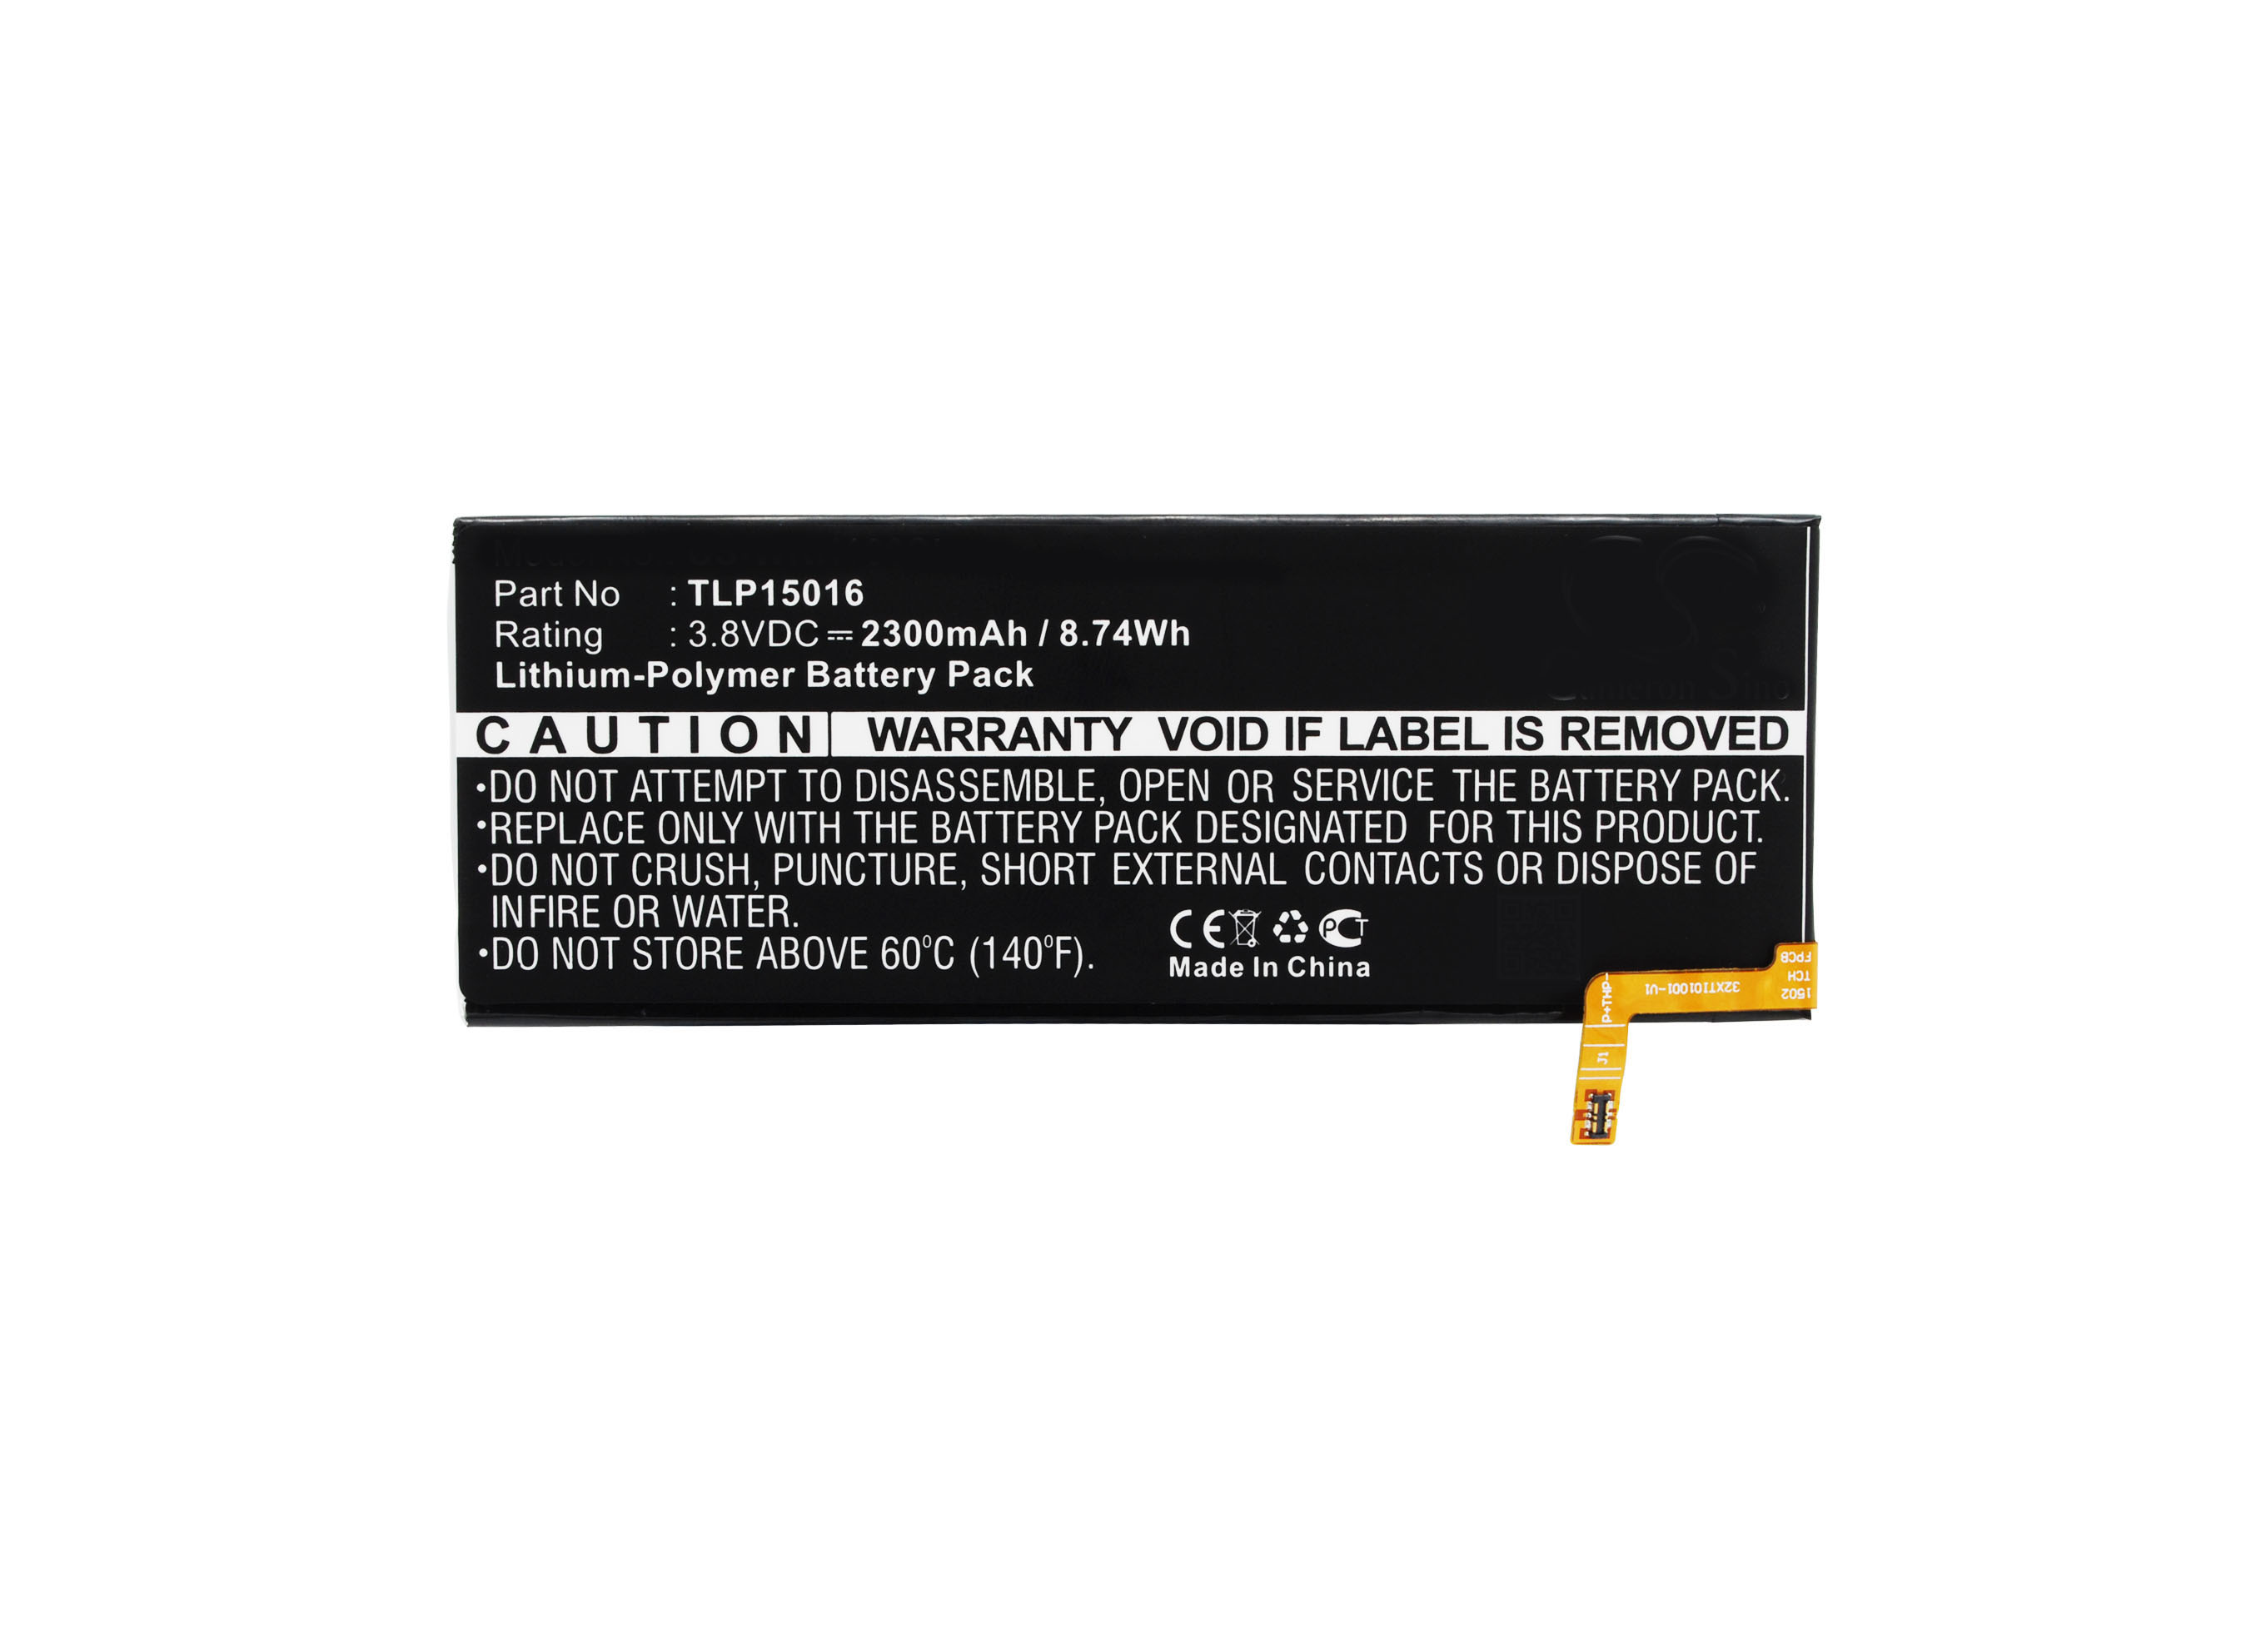 Synergy Digital Battery Compatible With Wiko S104-Q06000-000 Cellphone Battery - (Li-Pol, 3.8V, 2300 mAh / 8.74Wh)